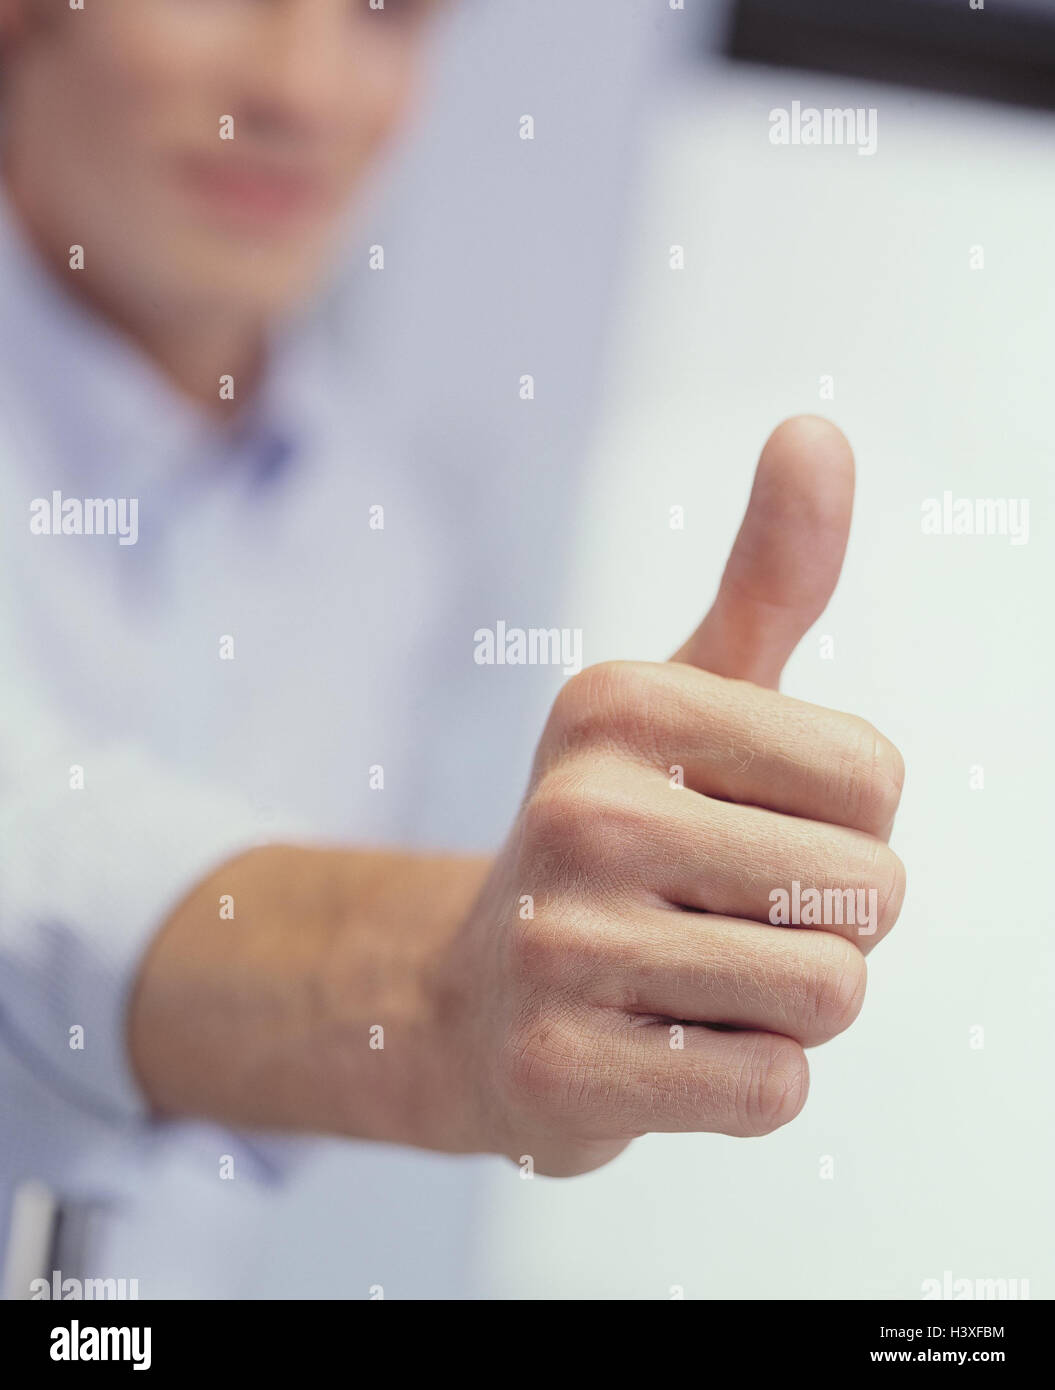 Man, detail, hand, gesture, o.k., man's hand, okay, positively, well, perfectly, body language, success, enthusiasm, hand figure, figure, sign language, hand position, pollex, high, icon, in order, OK, printout Stock Photo